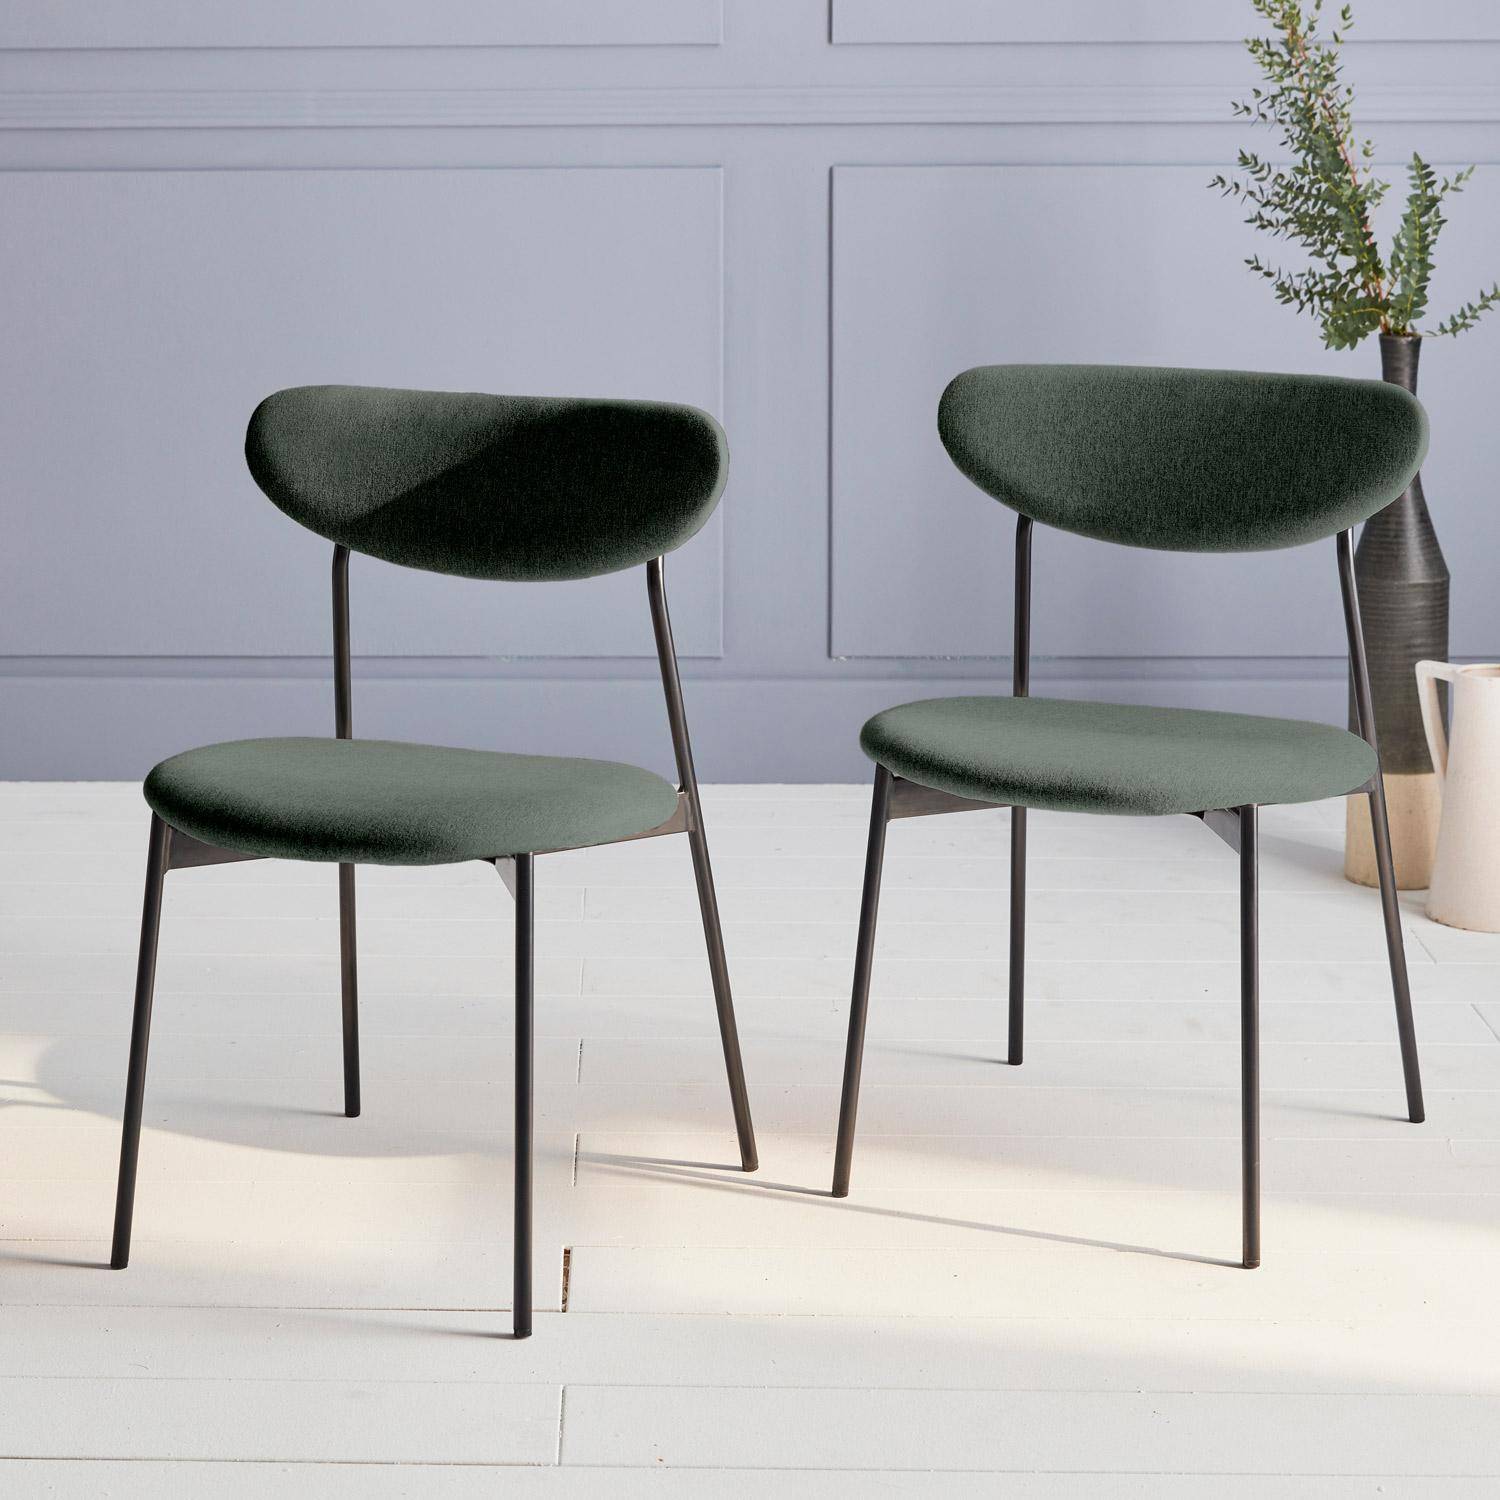 Set of 2 retro style dining chairs with steel legs - Arty - Green,sweeek,Photo1